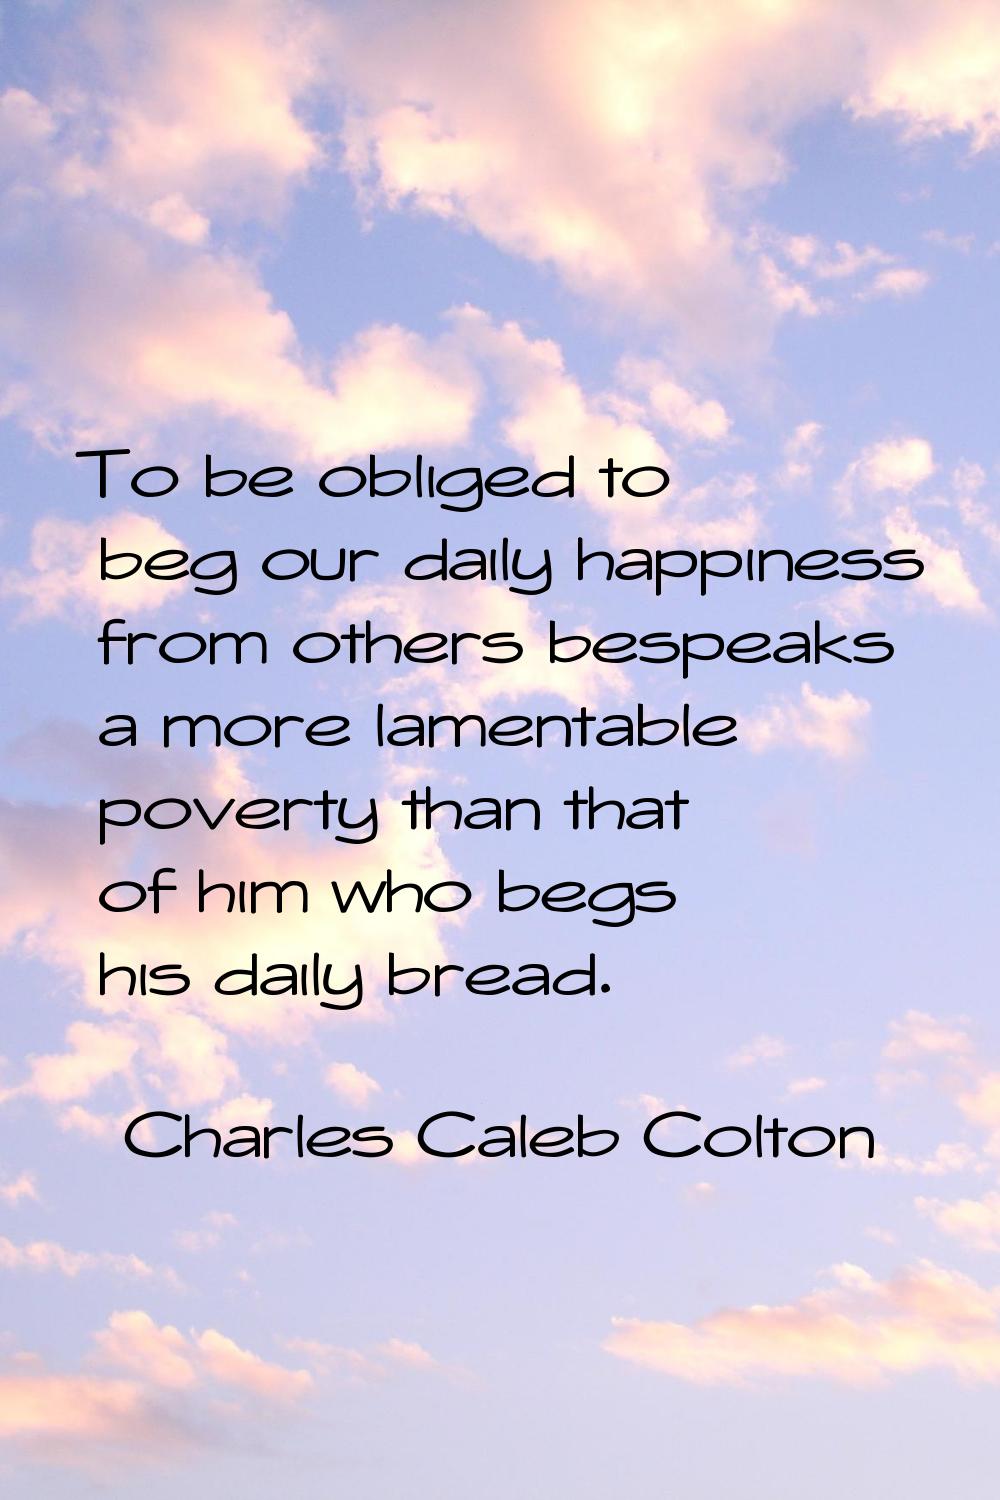 To be obliged to beg our daily happiness from others bespeaks a more lamentable poverty than that o